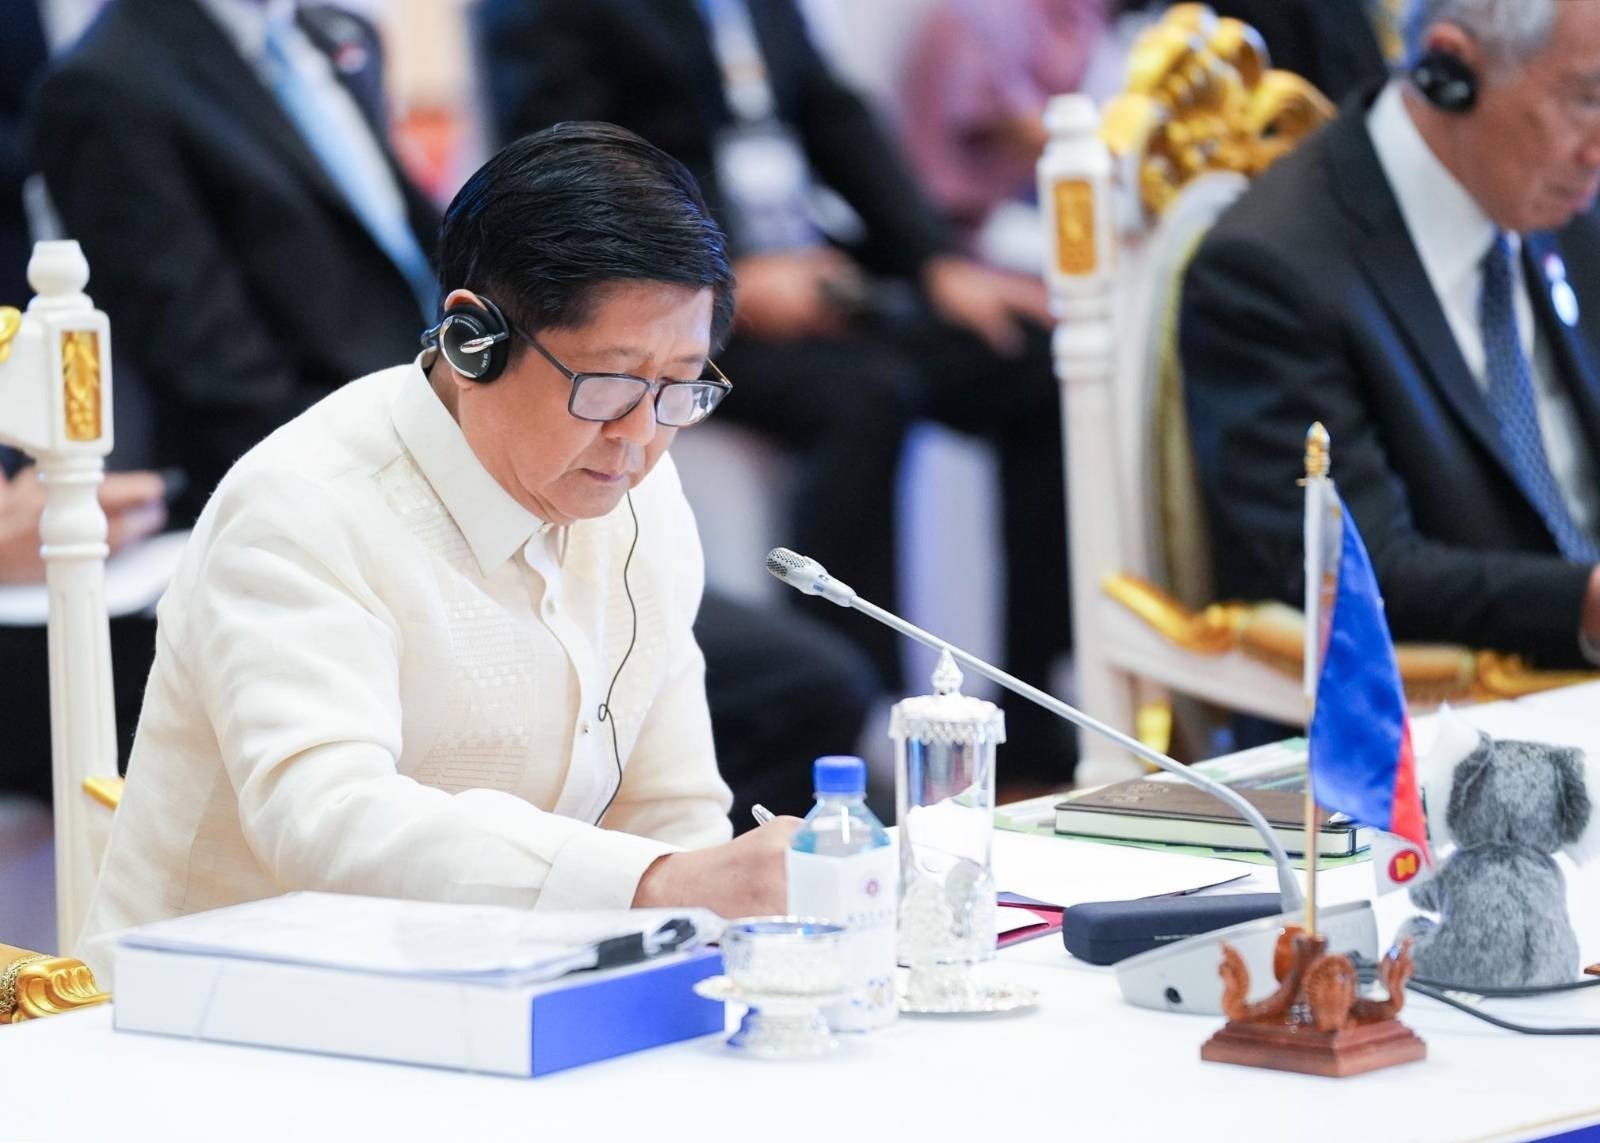 The country is prepared to handle the risks caused by the Russia-Ukraine conflict and natural disasters which have caused inflationary pressures on food, transportation and energy, said President Ferdinand Marcos Jr. during the second Association of Southeast Asian Nations (Asean) Global Dialogue on Sunday.